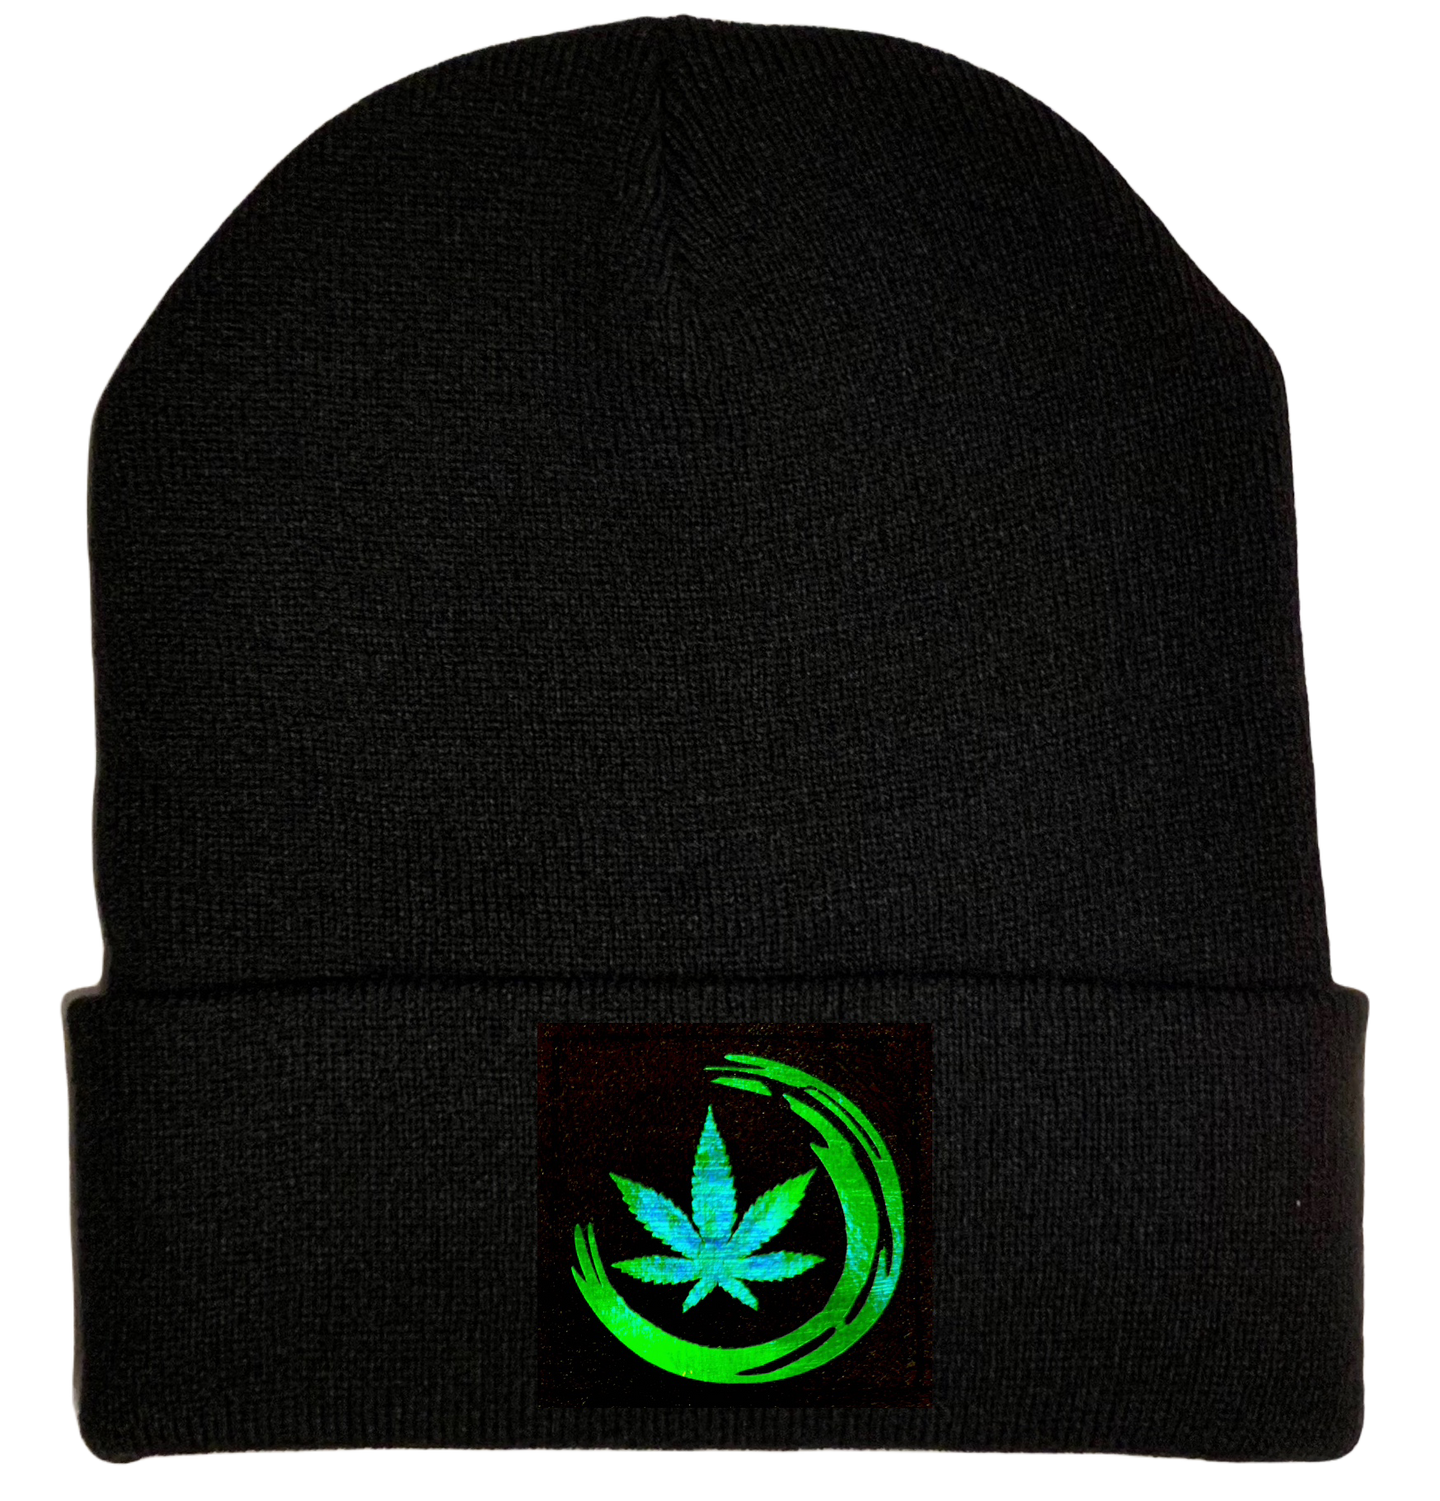 Beanie - Black with Hand Made Holographic Green, Vegan Leather Zen Cannabis Leaf Patch over your Third Eye - Plant Medicine Hat by Buddha Gear 